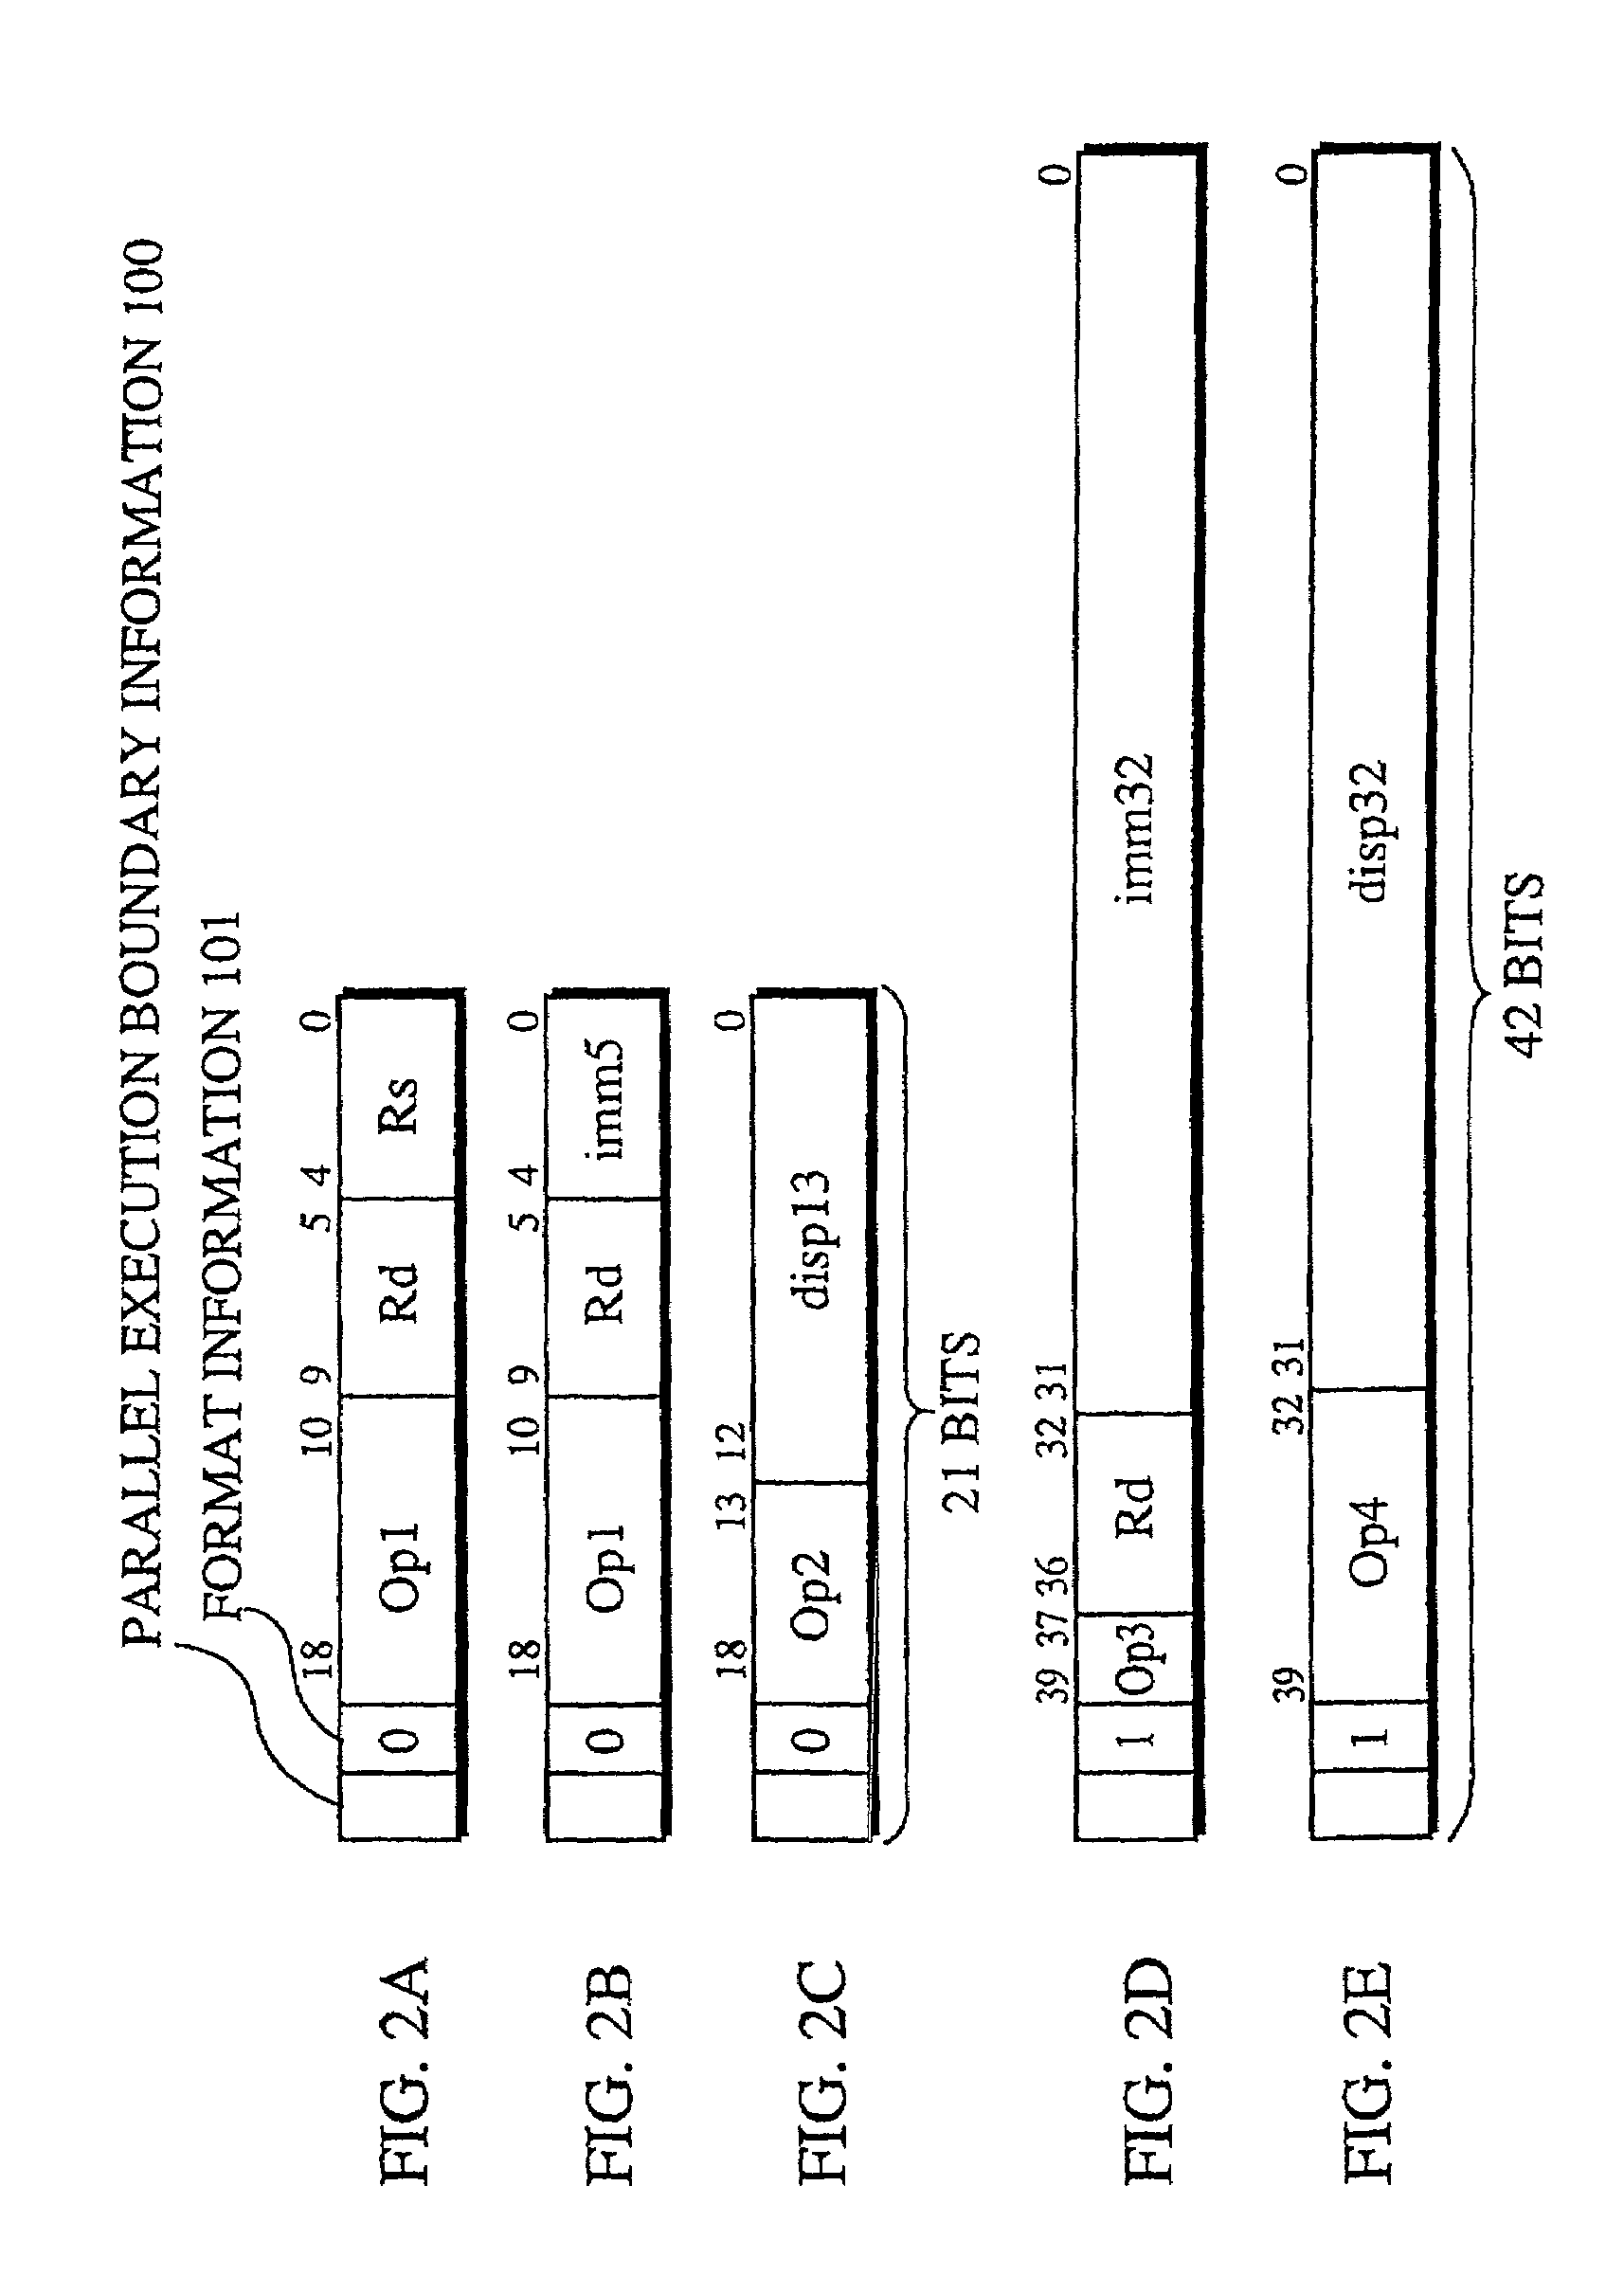 Processor for executing instructions in units that are unrelated to the units in which instructions are read, and a compiler, an optimization apparatus, an assembler, a linker, a debugger and a disassembler for such processor